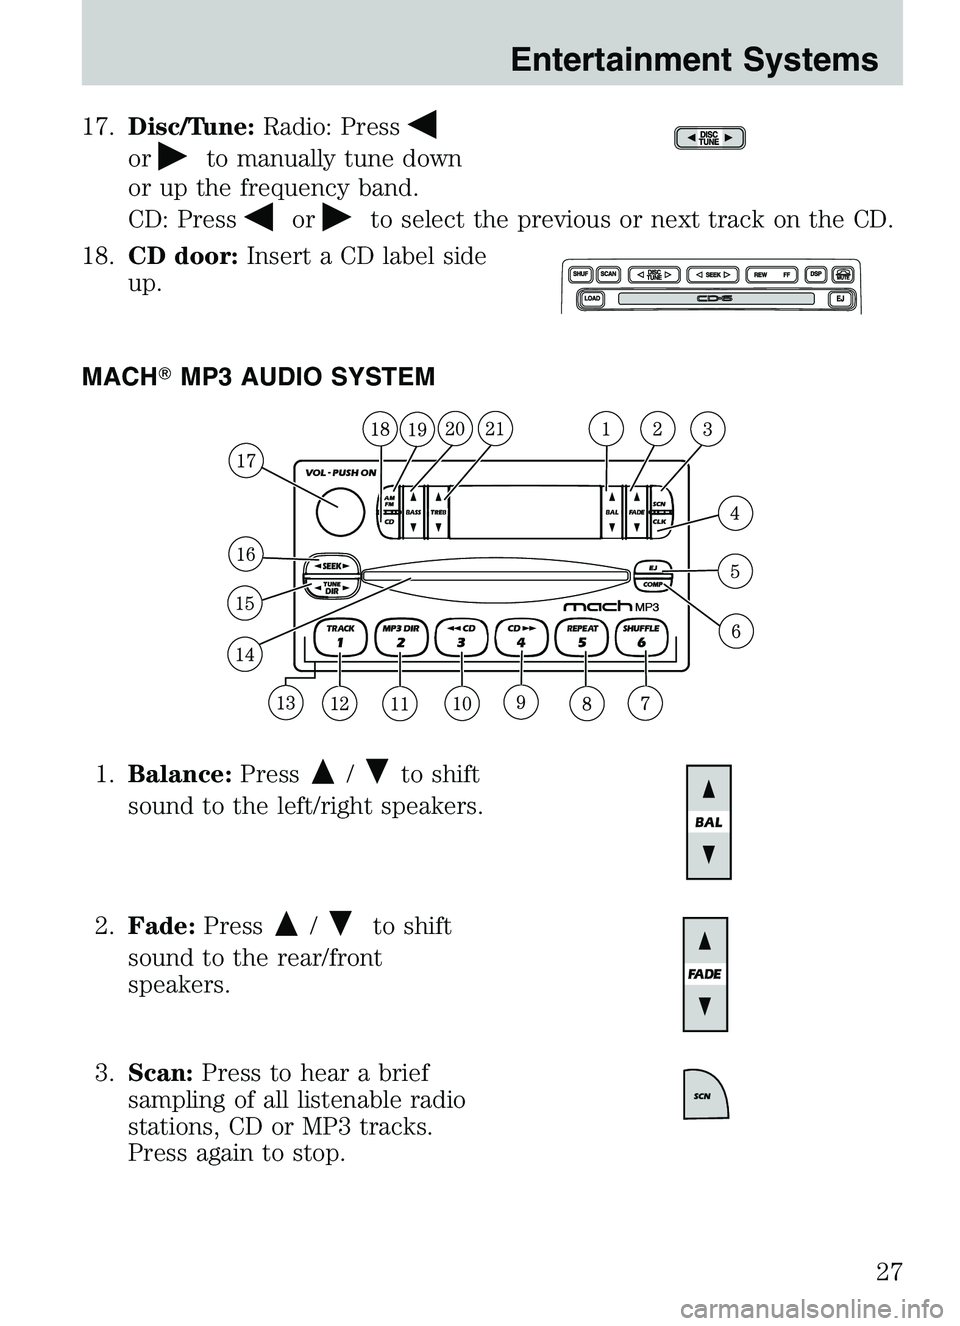 MAZDA MODEL B4000 2003  Owners Manual 17.Disc/Tune: Radio: Press
orto manually tune down
or up the frequency band.
CD: Press
orto select the previous or next track on the CD.
18. CD door: Insert a CD label side
up.
MACH MP3 AUDIO SYSTEM
